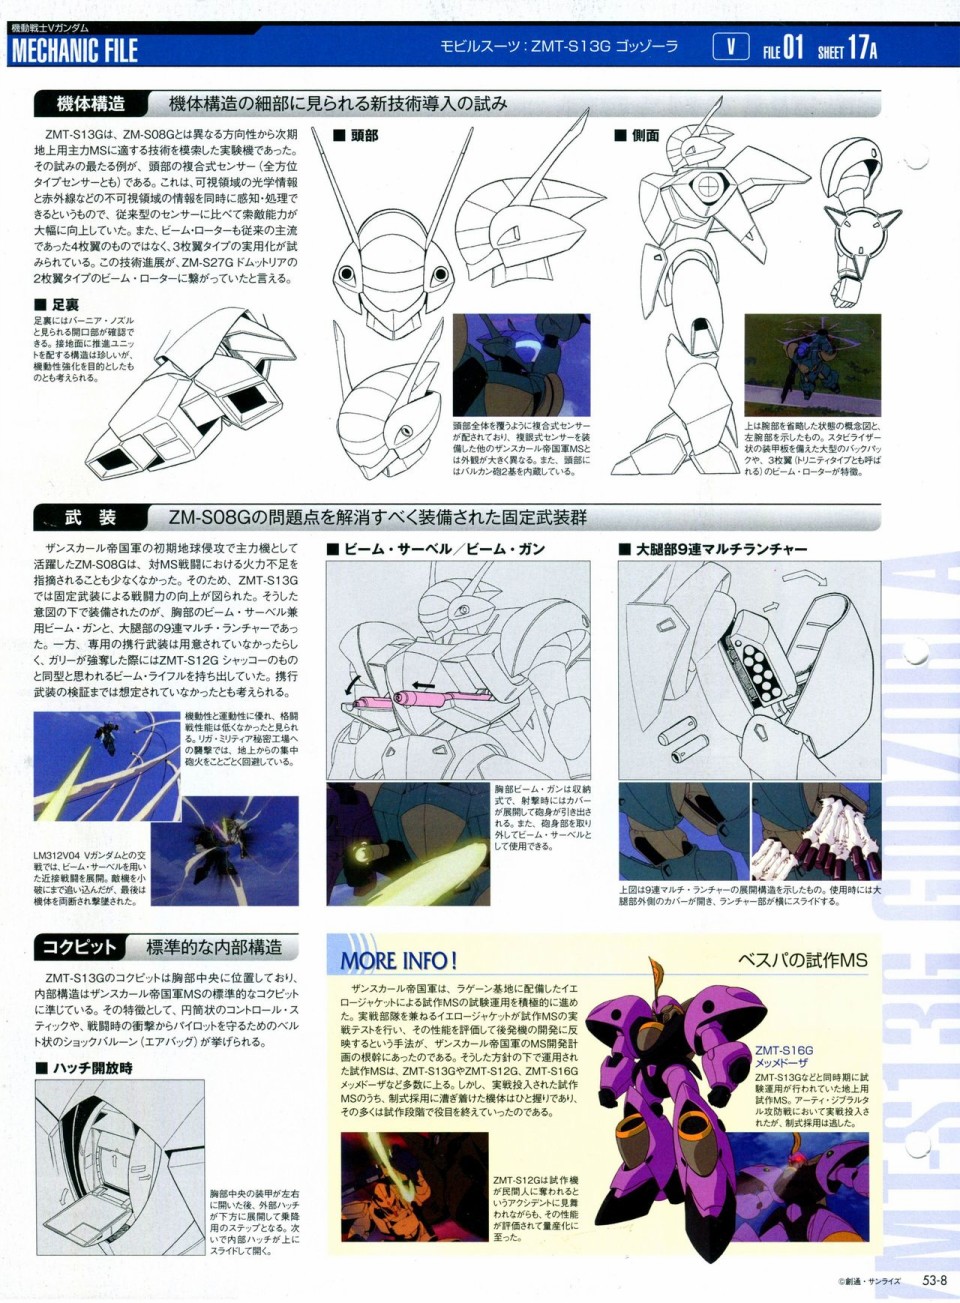 The Official Gundam Perfect File  - 第52-55話(1/3) - 4